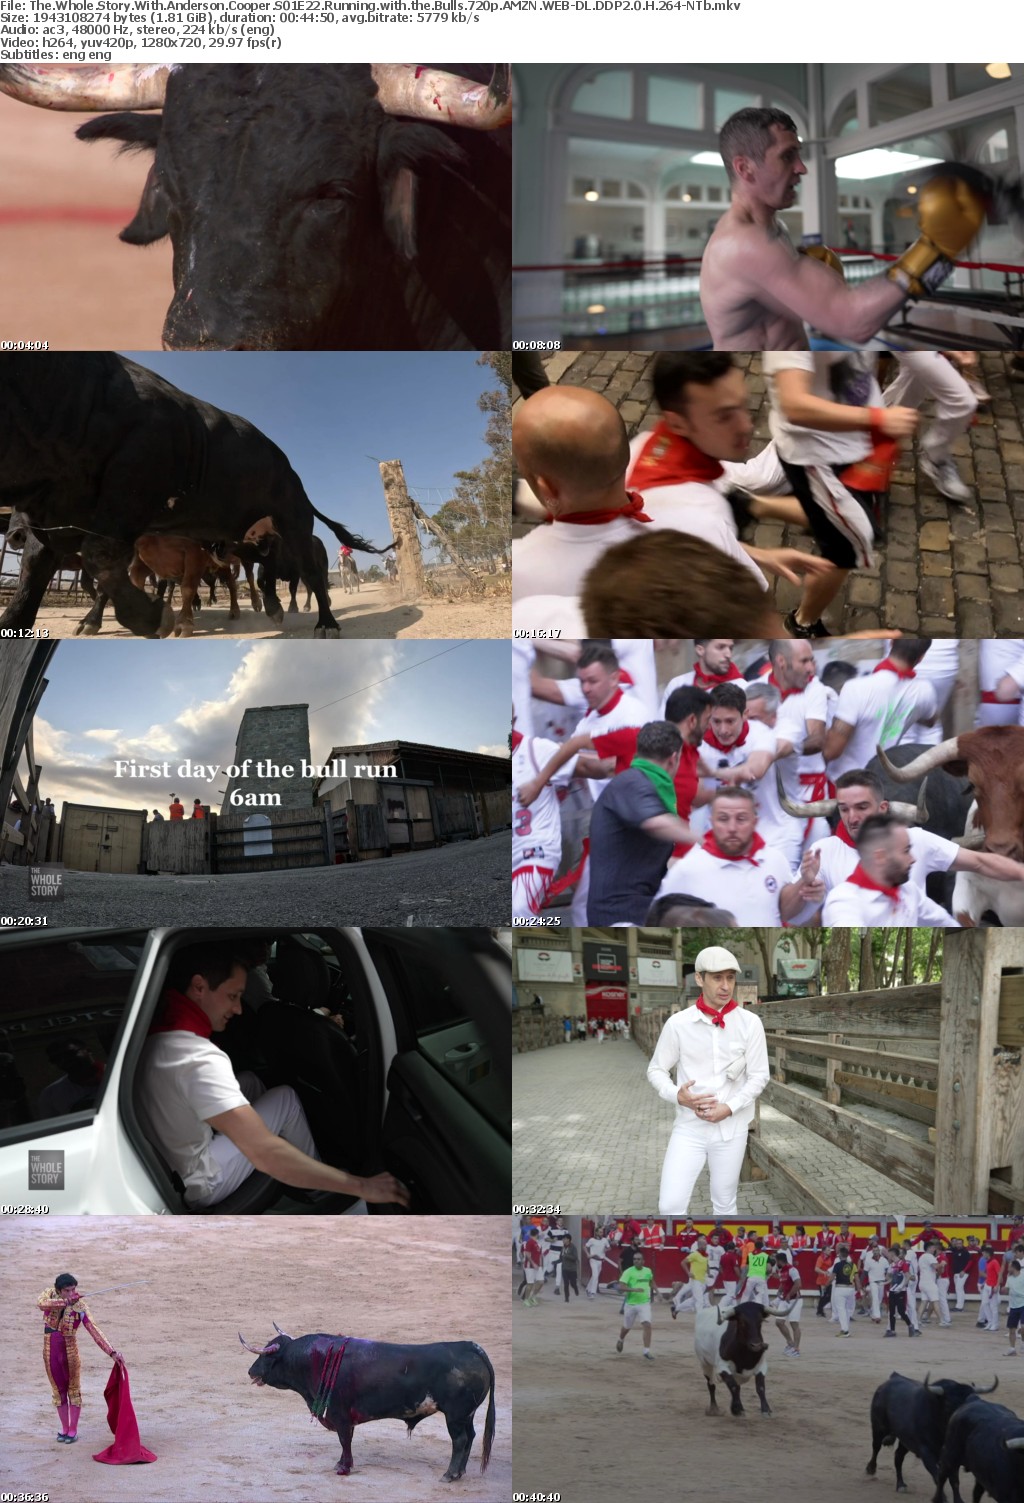 The Whole Story With Anderson Cooper S01E22 Running with the Bulls 720p AMZN WEB-DL DDP2 0 H 264-NTb